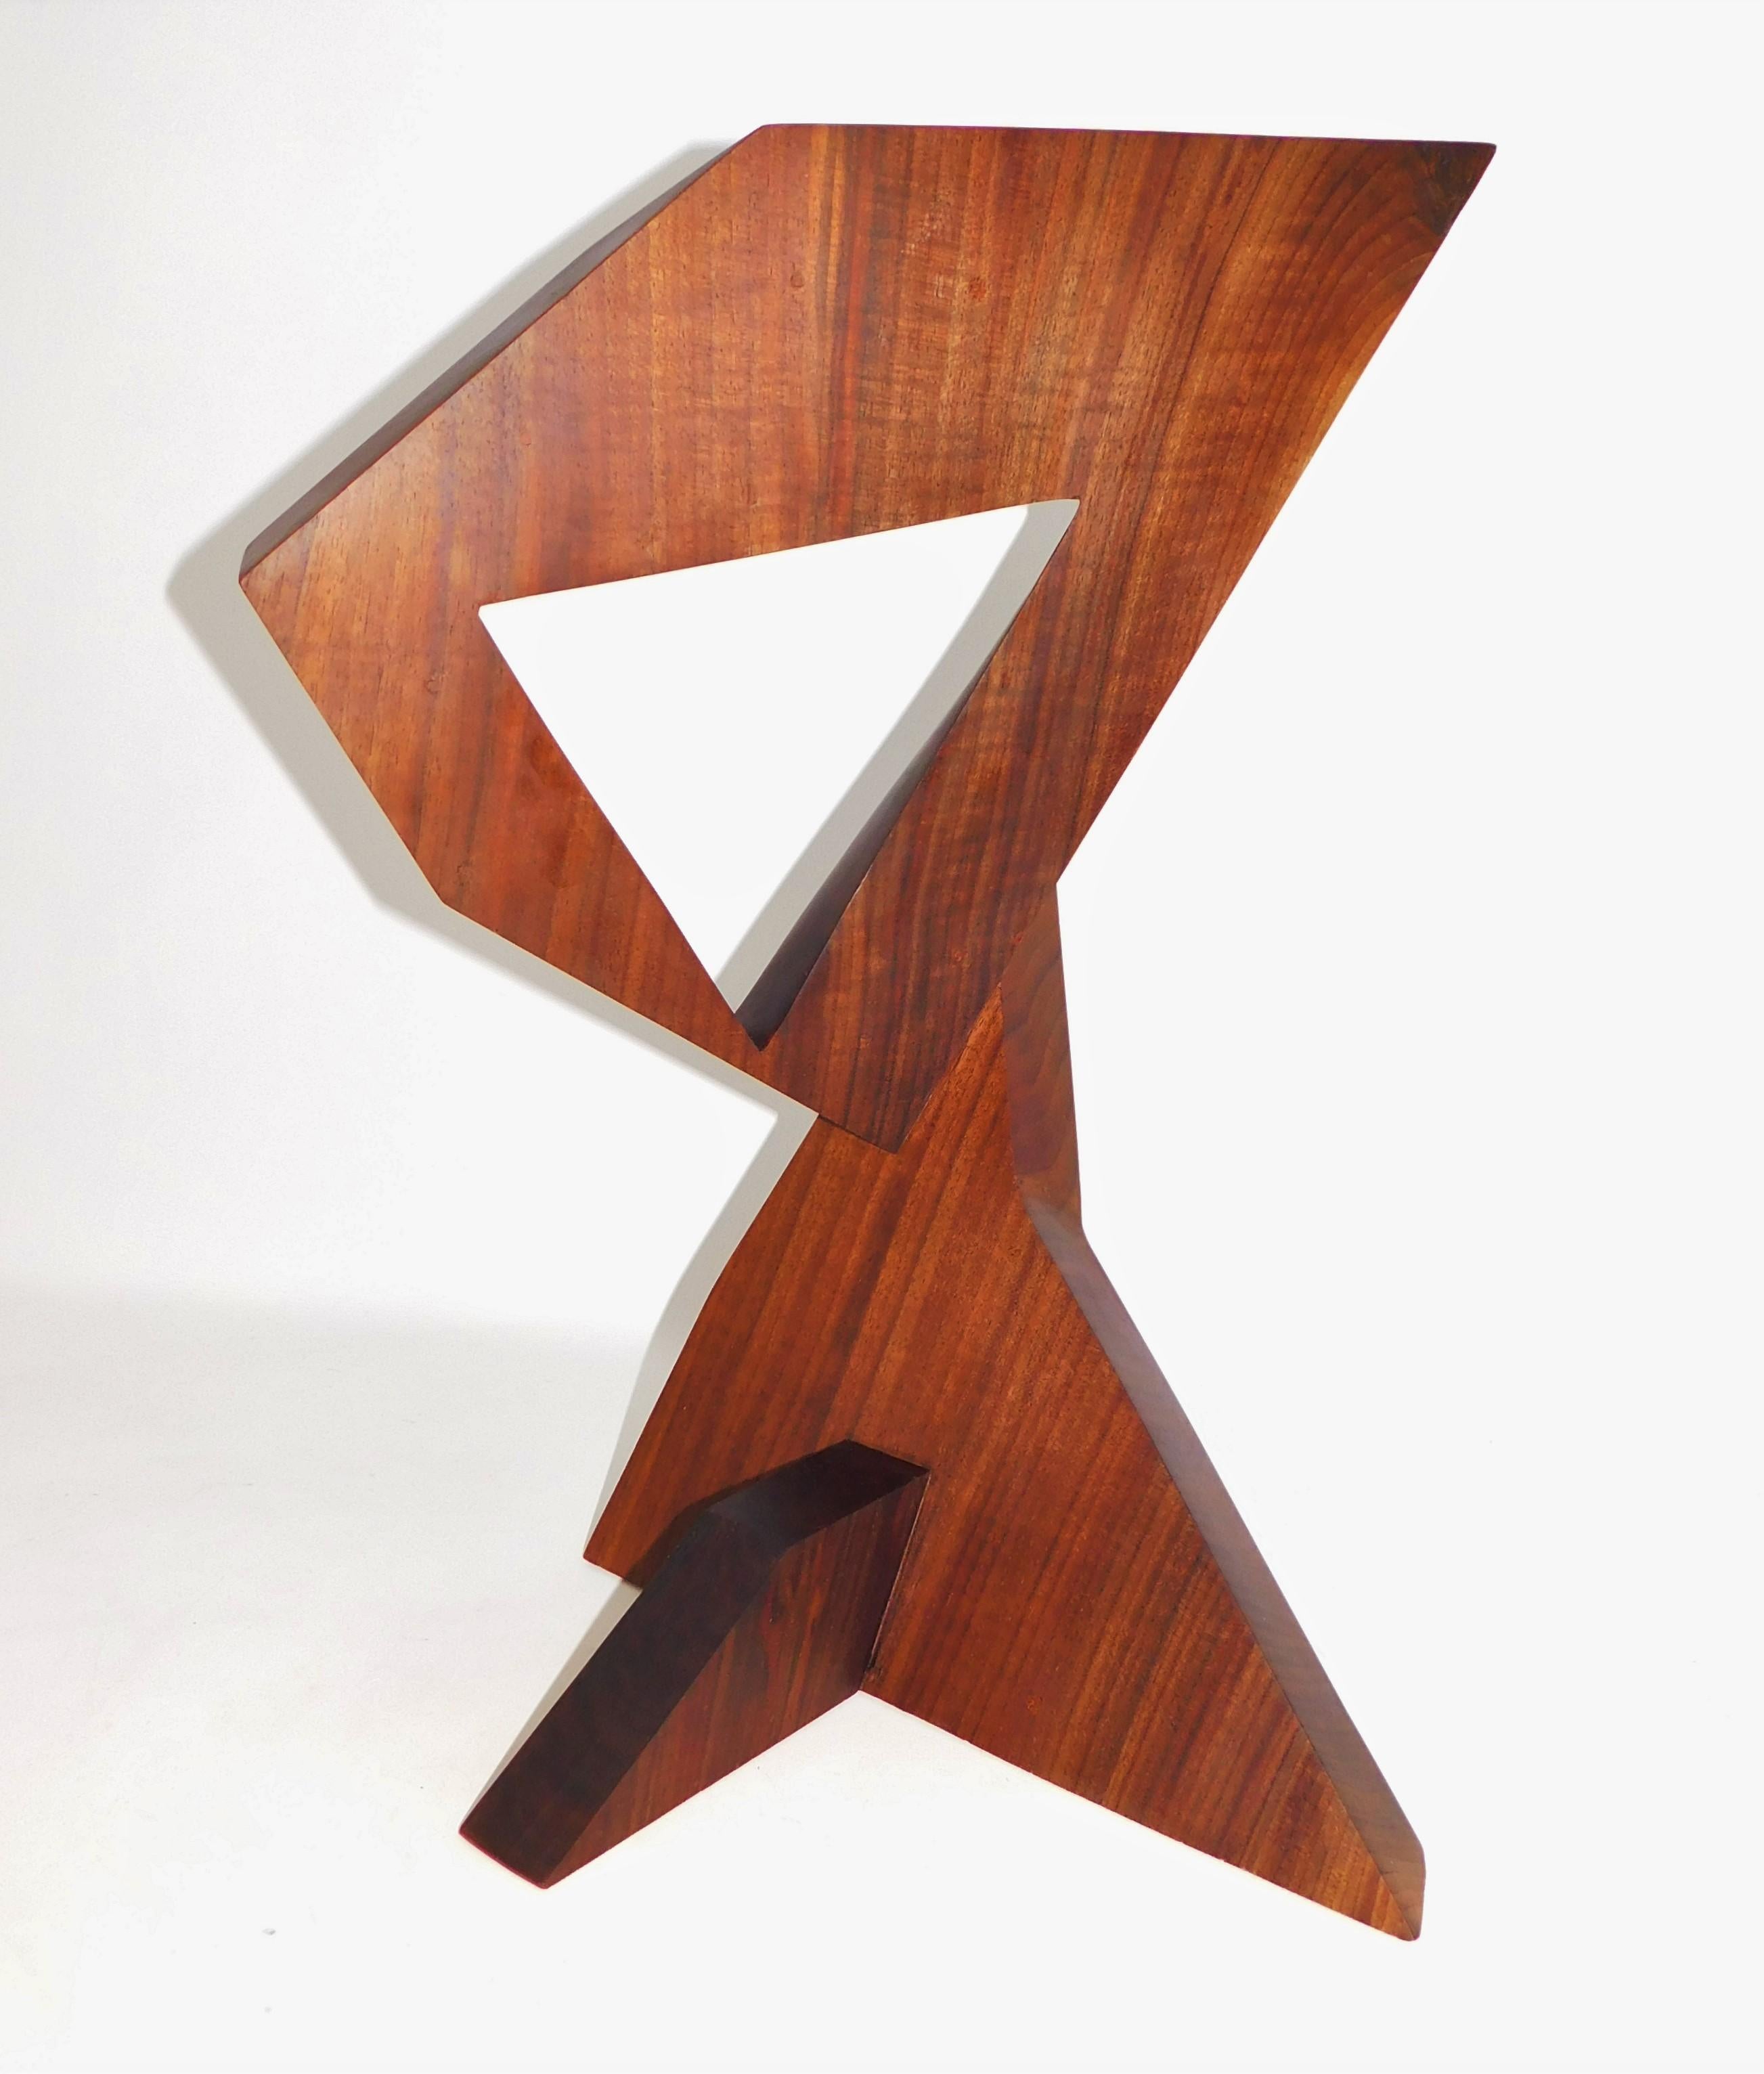 Hand-Crafted Modern Abstract Constructivist Walnut Wood Sculpture Signed Czeslaw Budny  For Sale